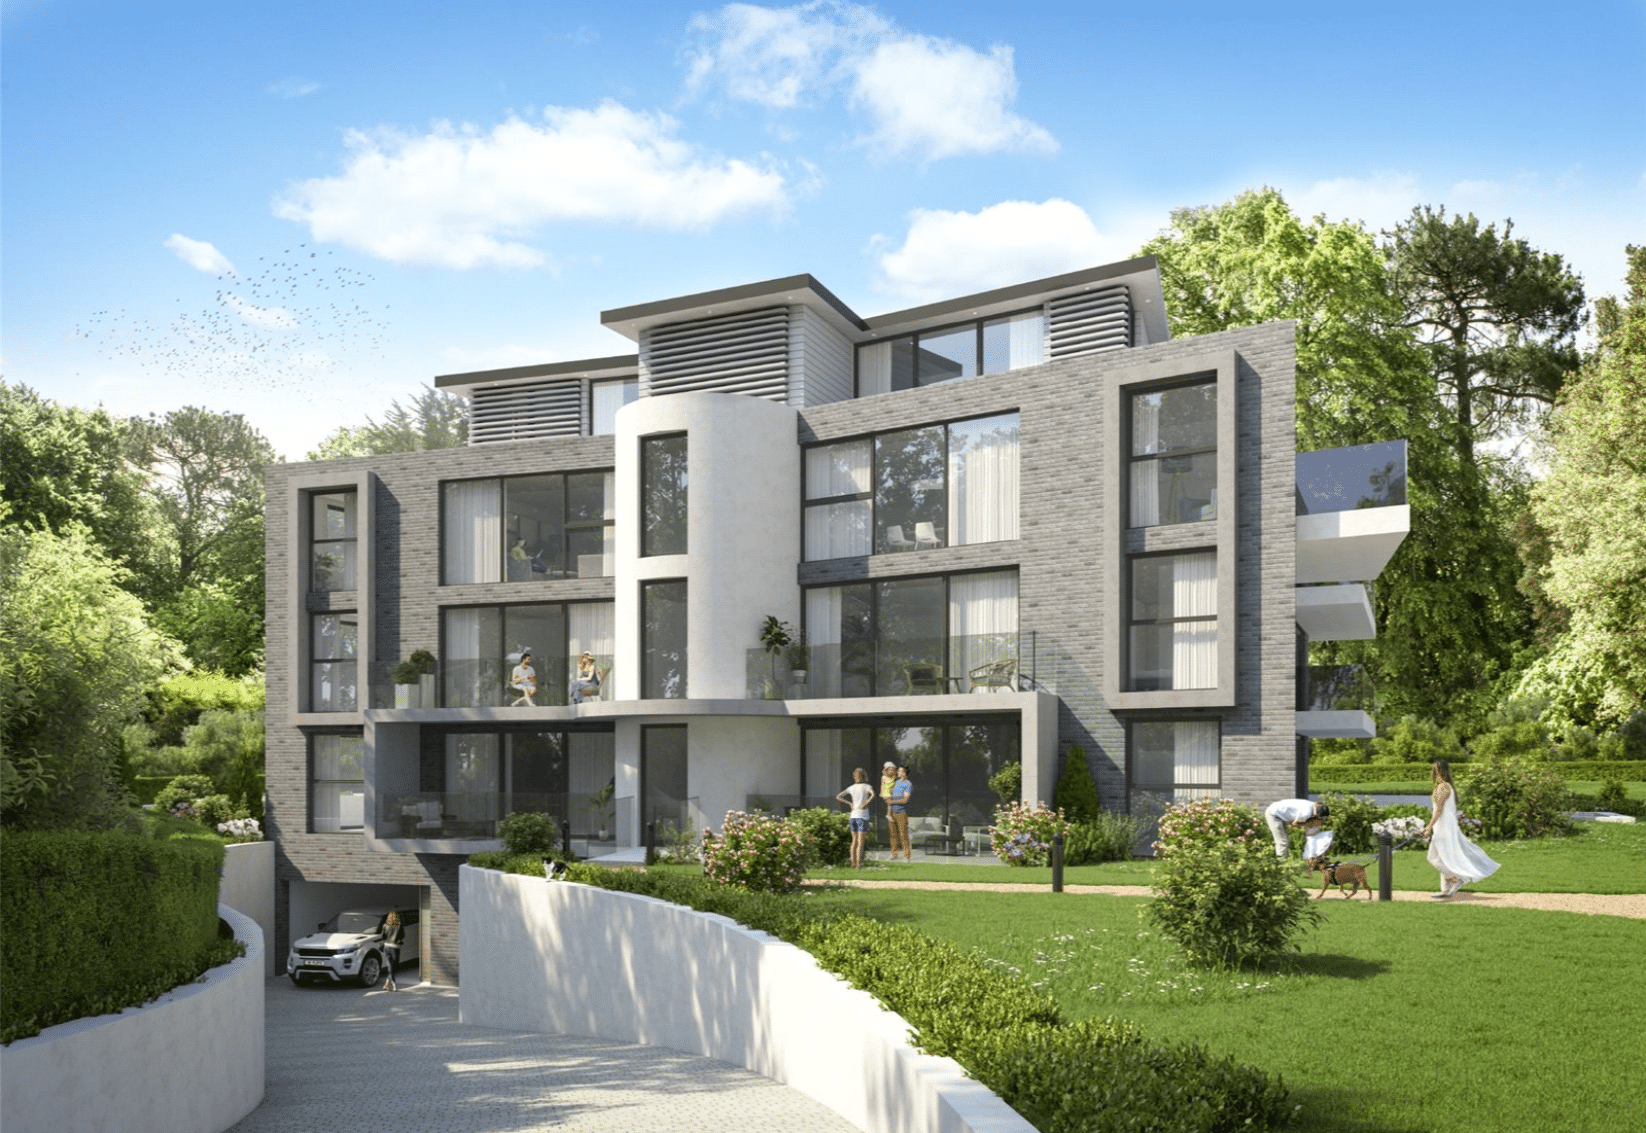 Part Built Site with Complication in Canford Cliffs, Poole design plans